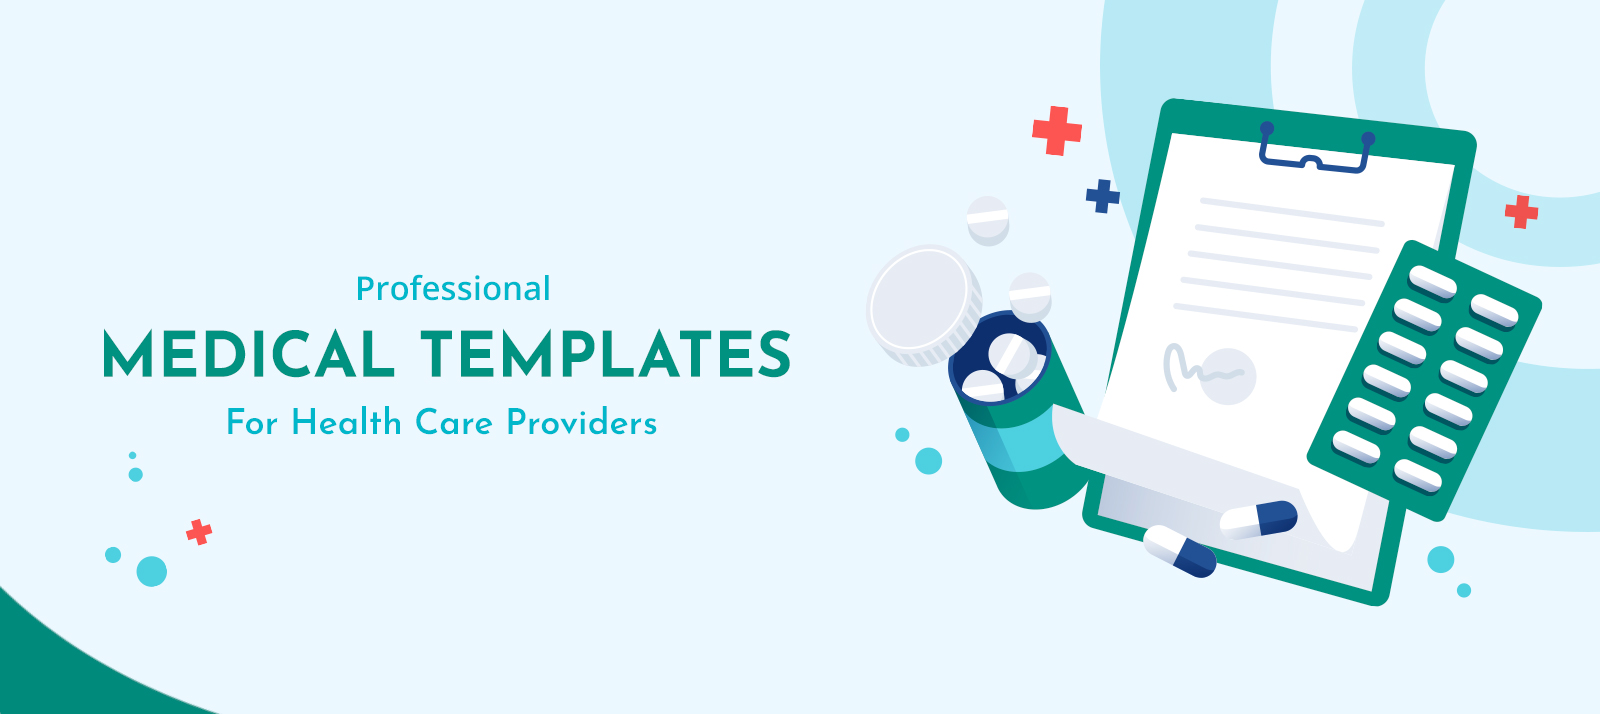  11 Best Professional Medical Templates For HealthCare Providers 